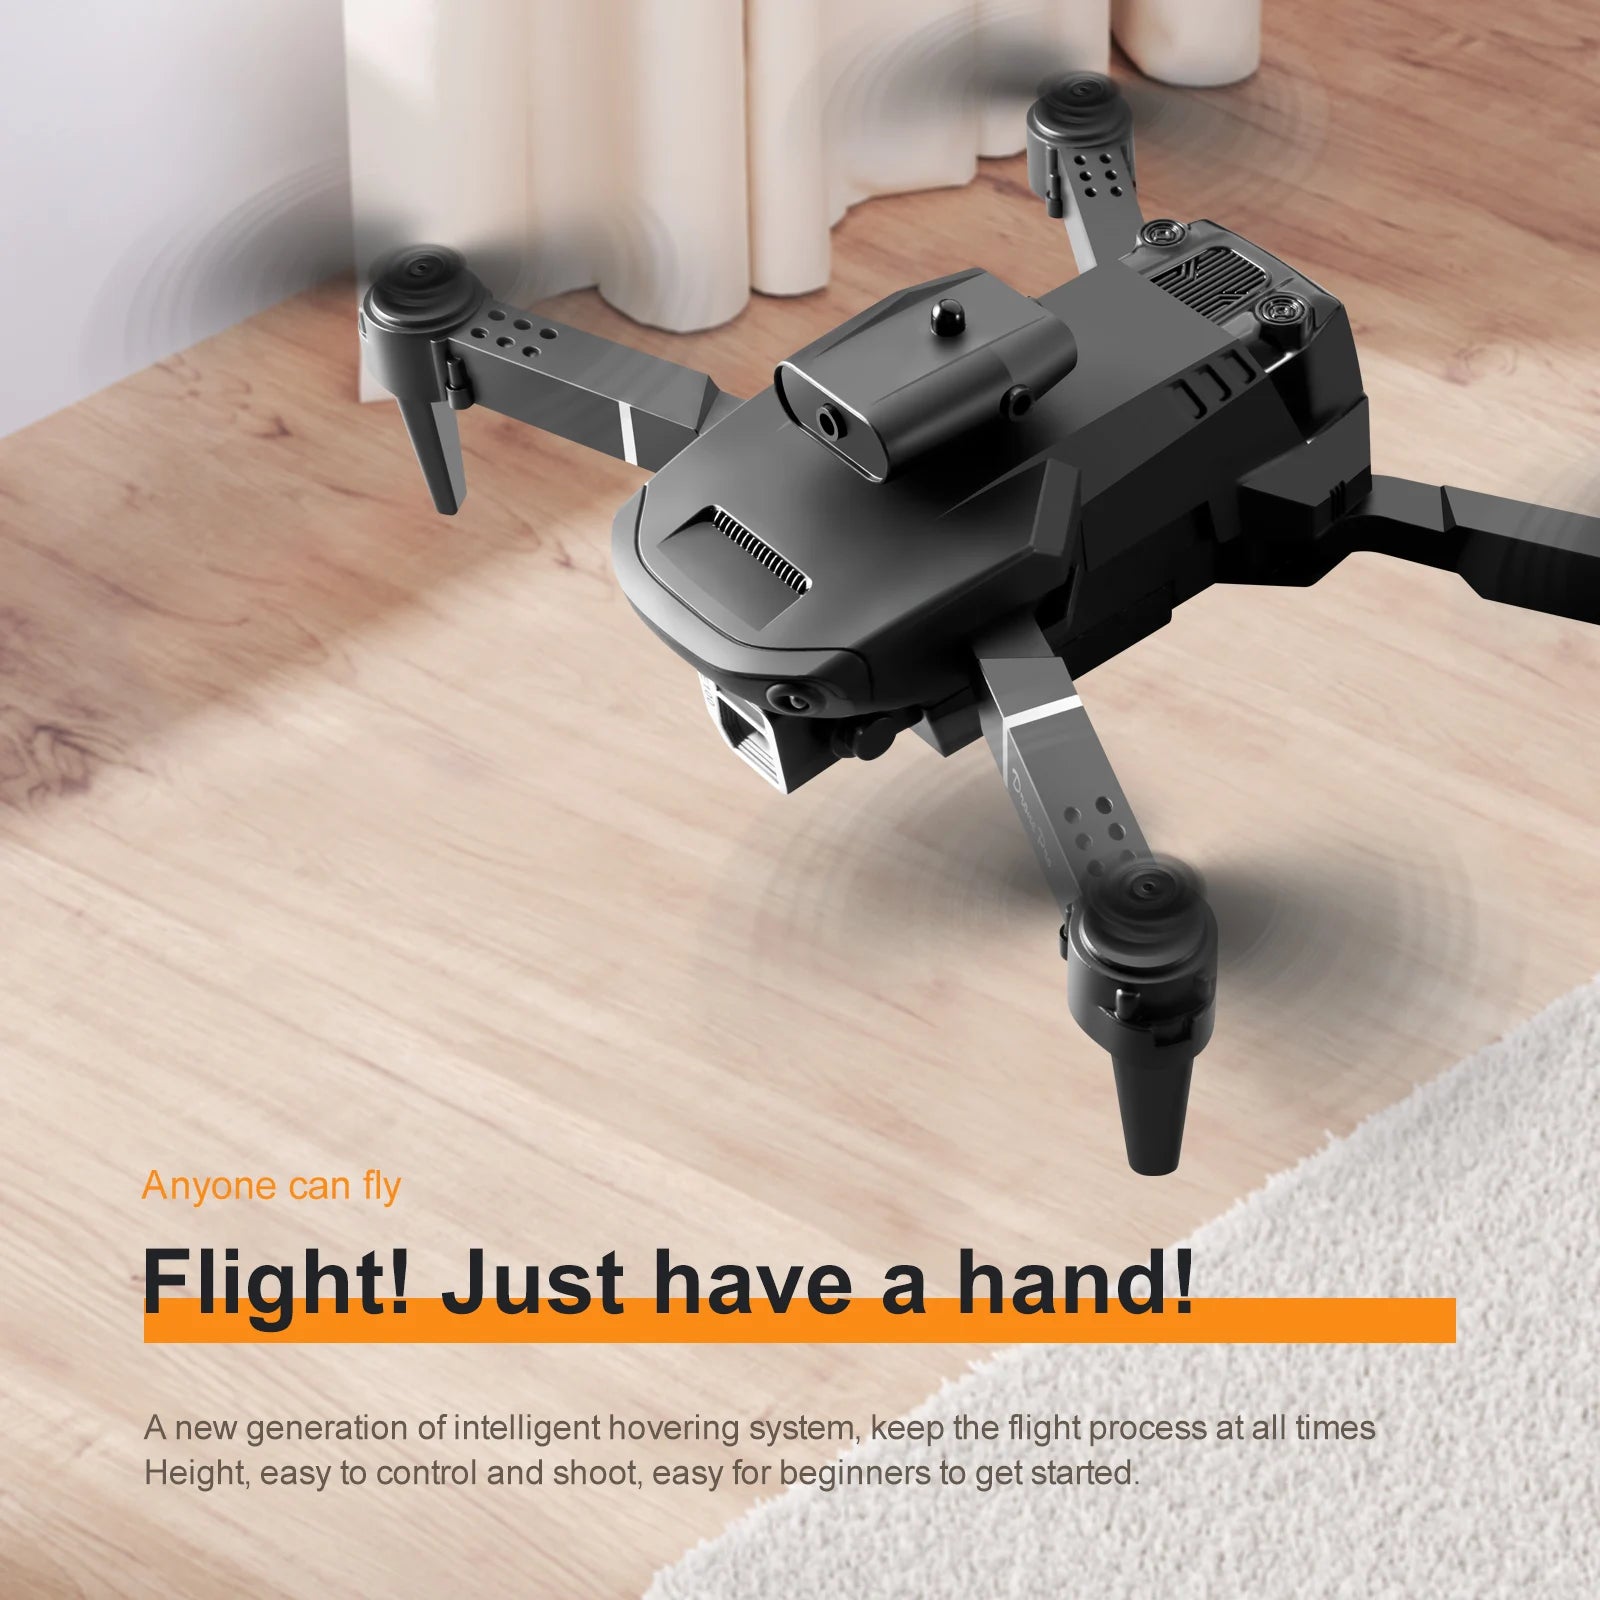 KBDFA E100 Mini Drone, a new generation of intelligent hovering system allows anyone to fly flight